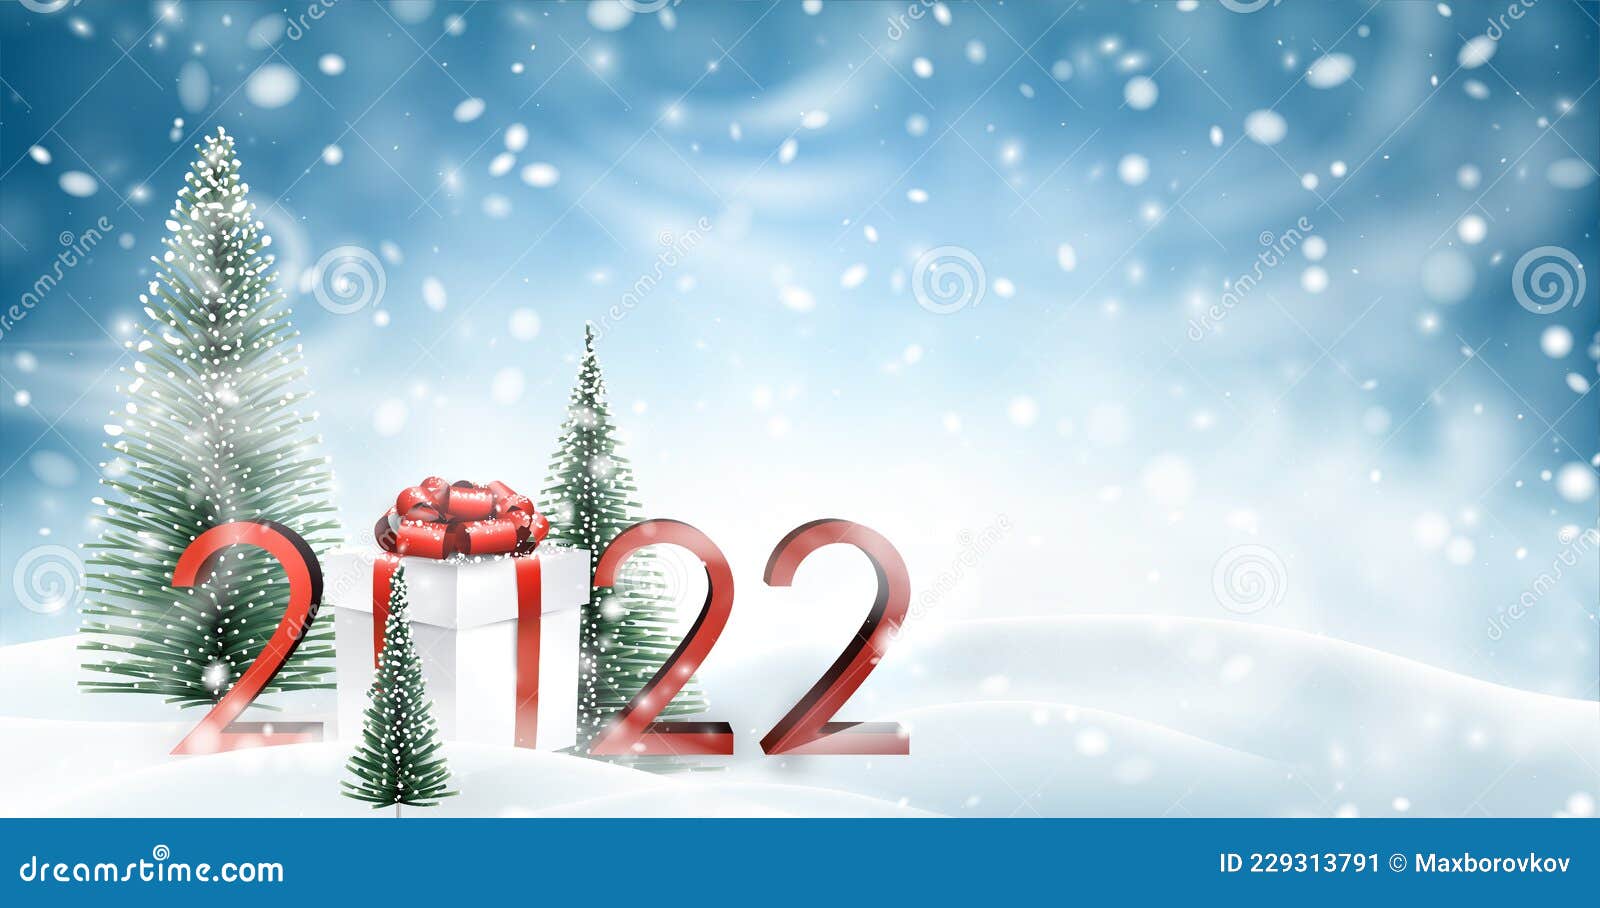 Gear up for 2022 with Background Christmas 2022 free and high-quality